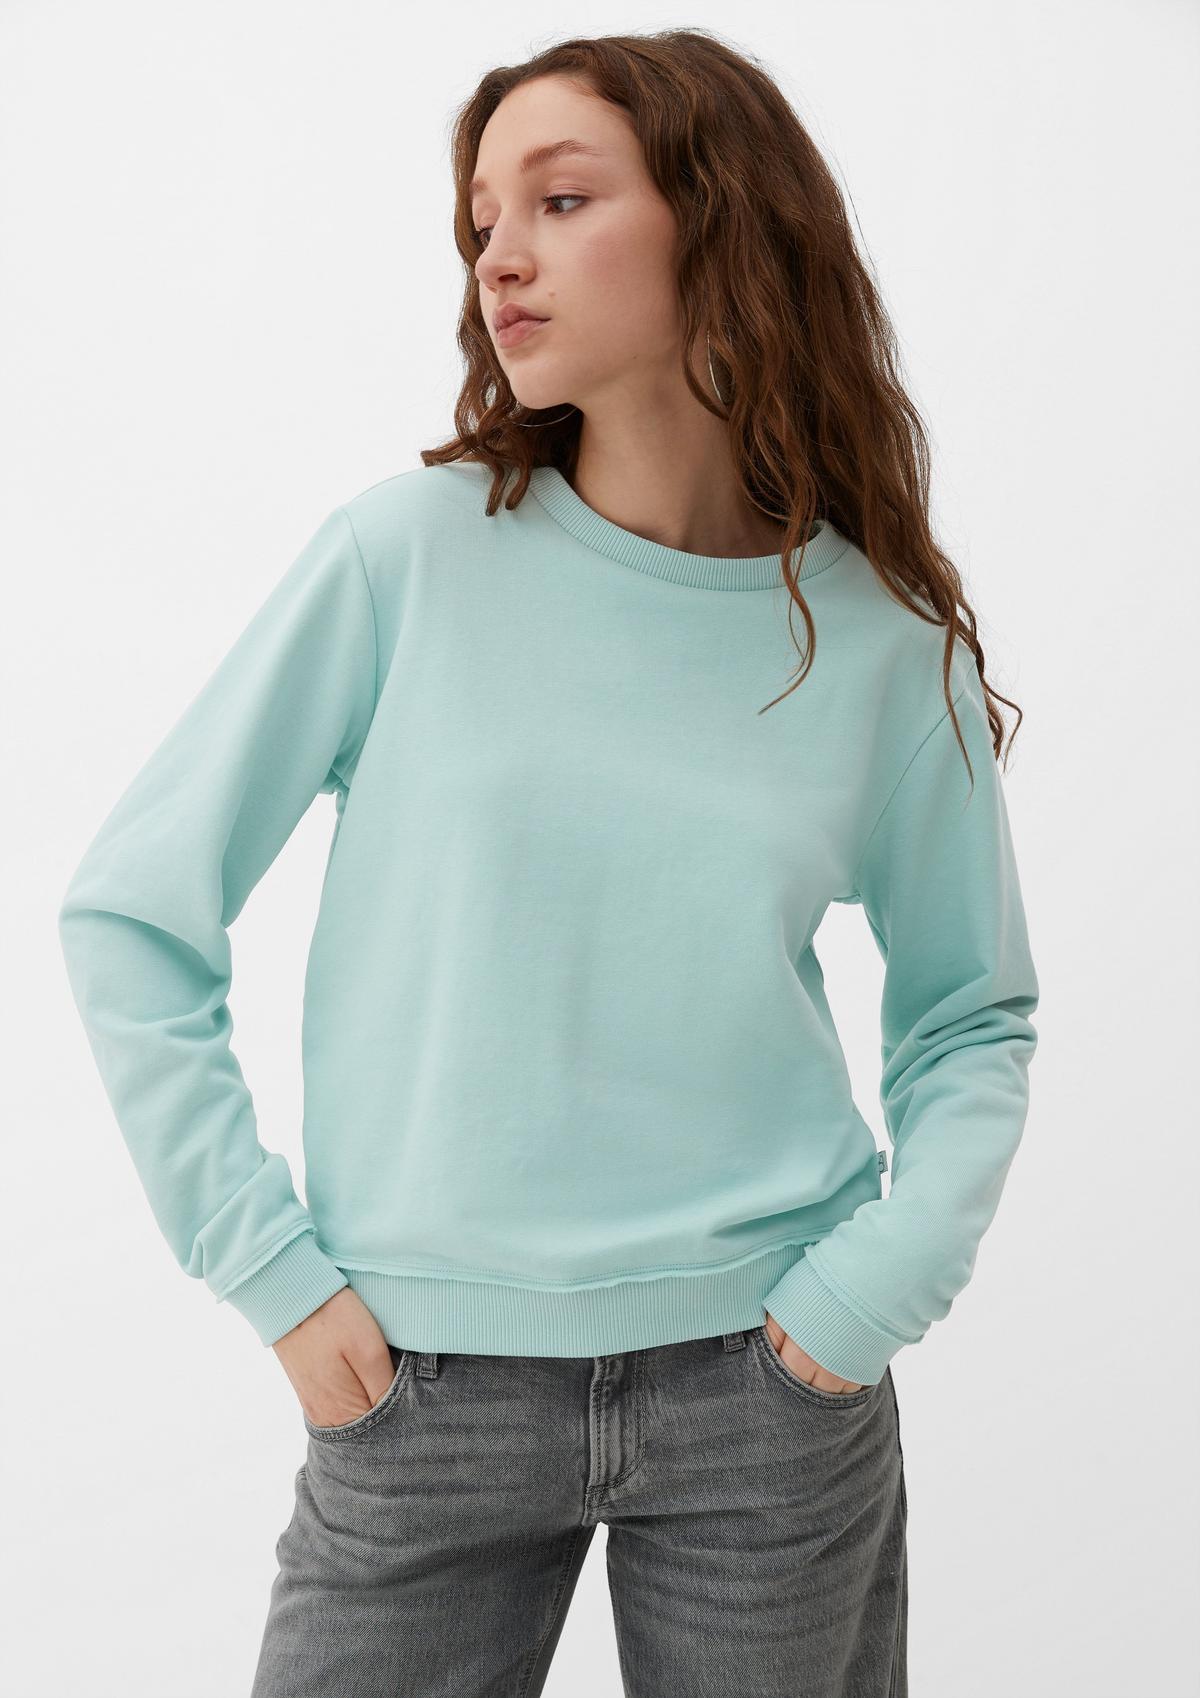 s.Oliver Sweatshirt with an unfinished hem